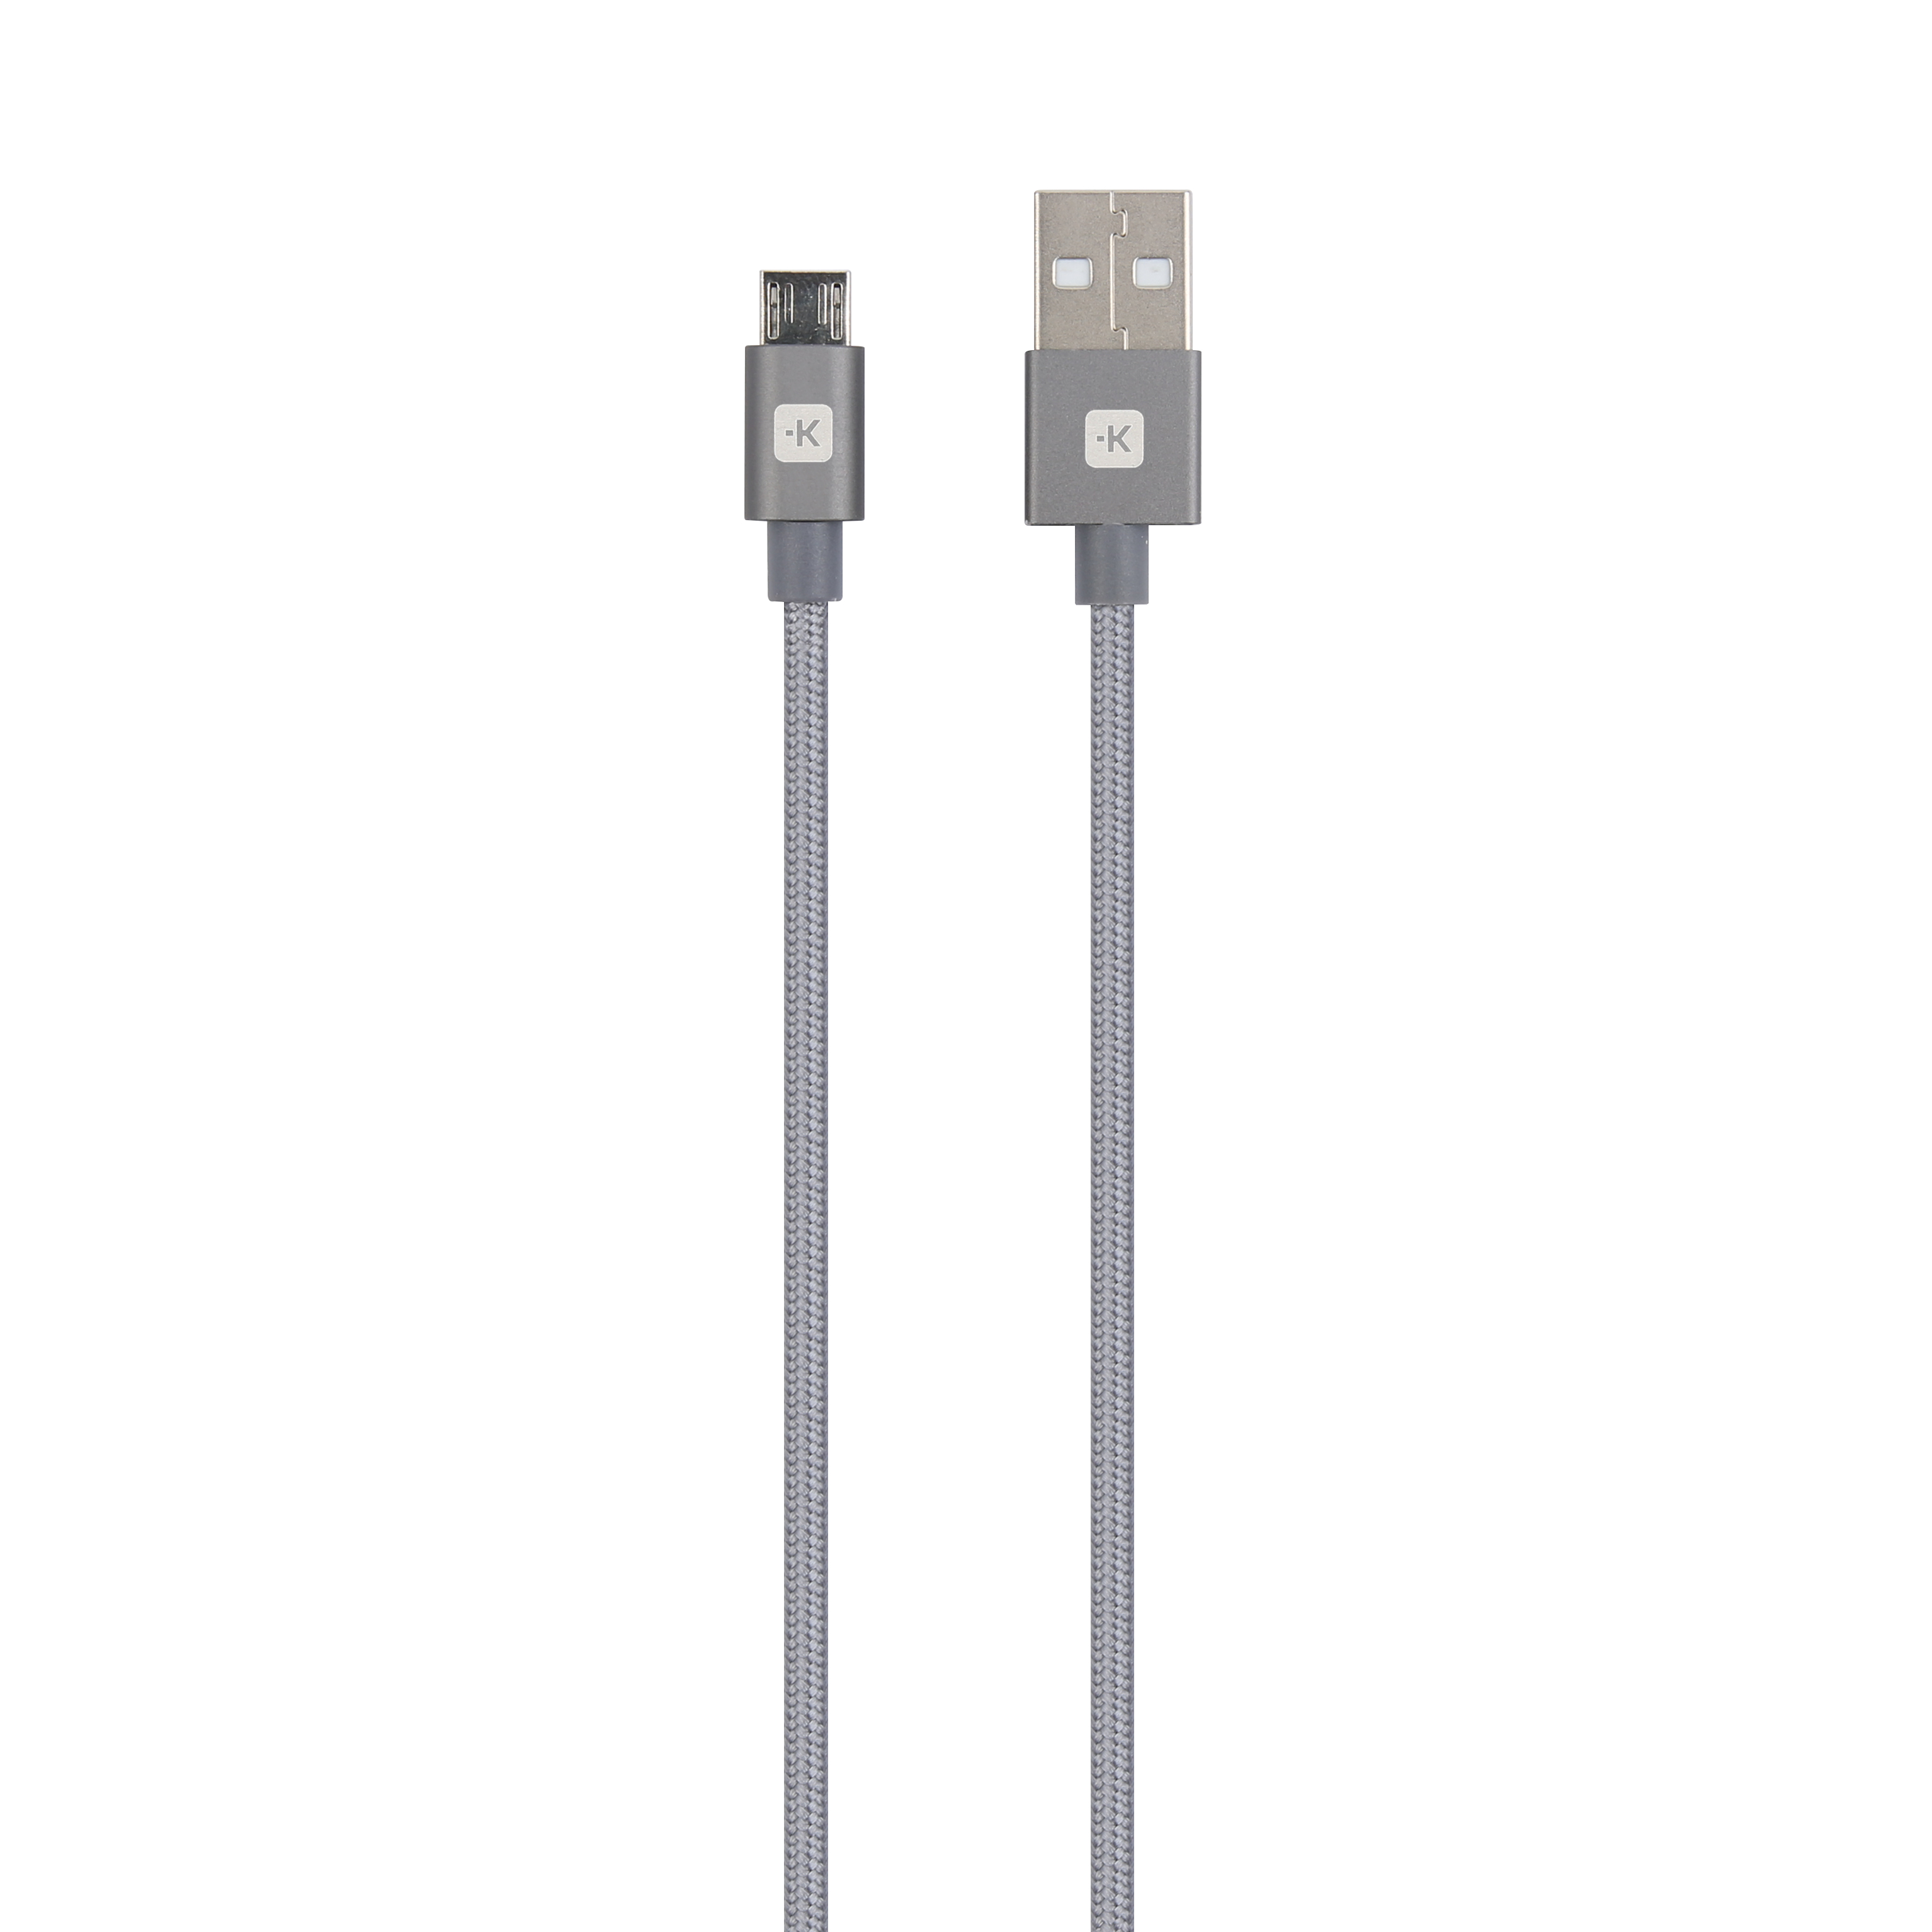 SKROSS Micro USB Cable SKCA0010A-M120CN 1.2m Space Grey